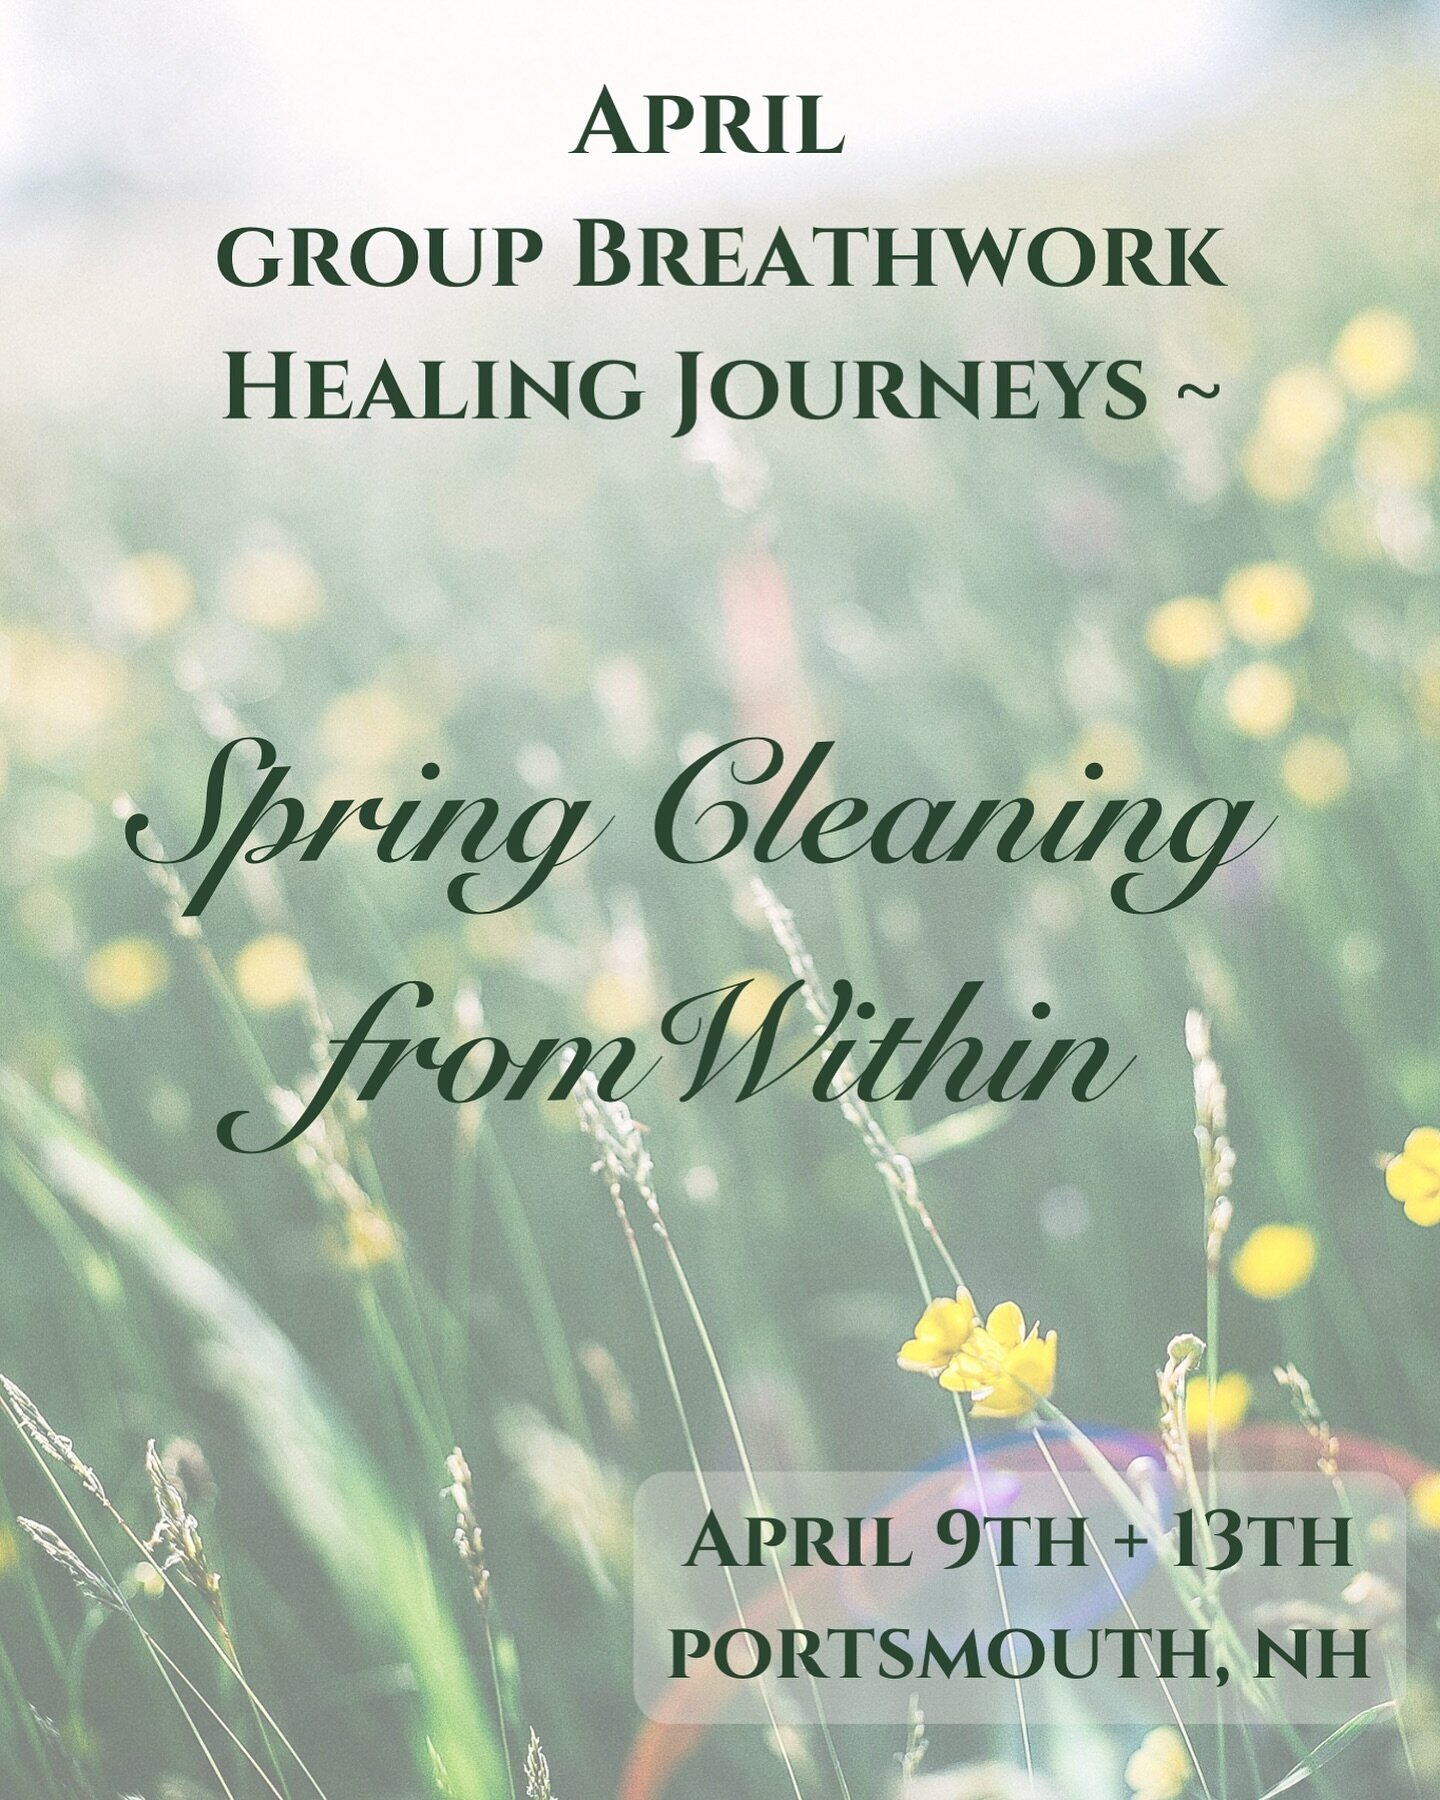 As the world outside blooms anew(even for those of us in the northeast, who may be getting snow this week),it&rsquo;s the perfect time for some inner rejuvenation too! 🌼 

I&rsquo;m thrilled to invite you to join this months Breathwork Healing Group